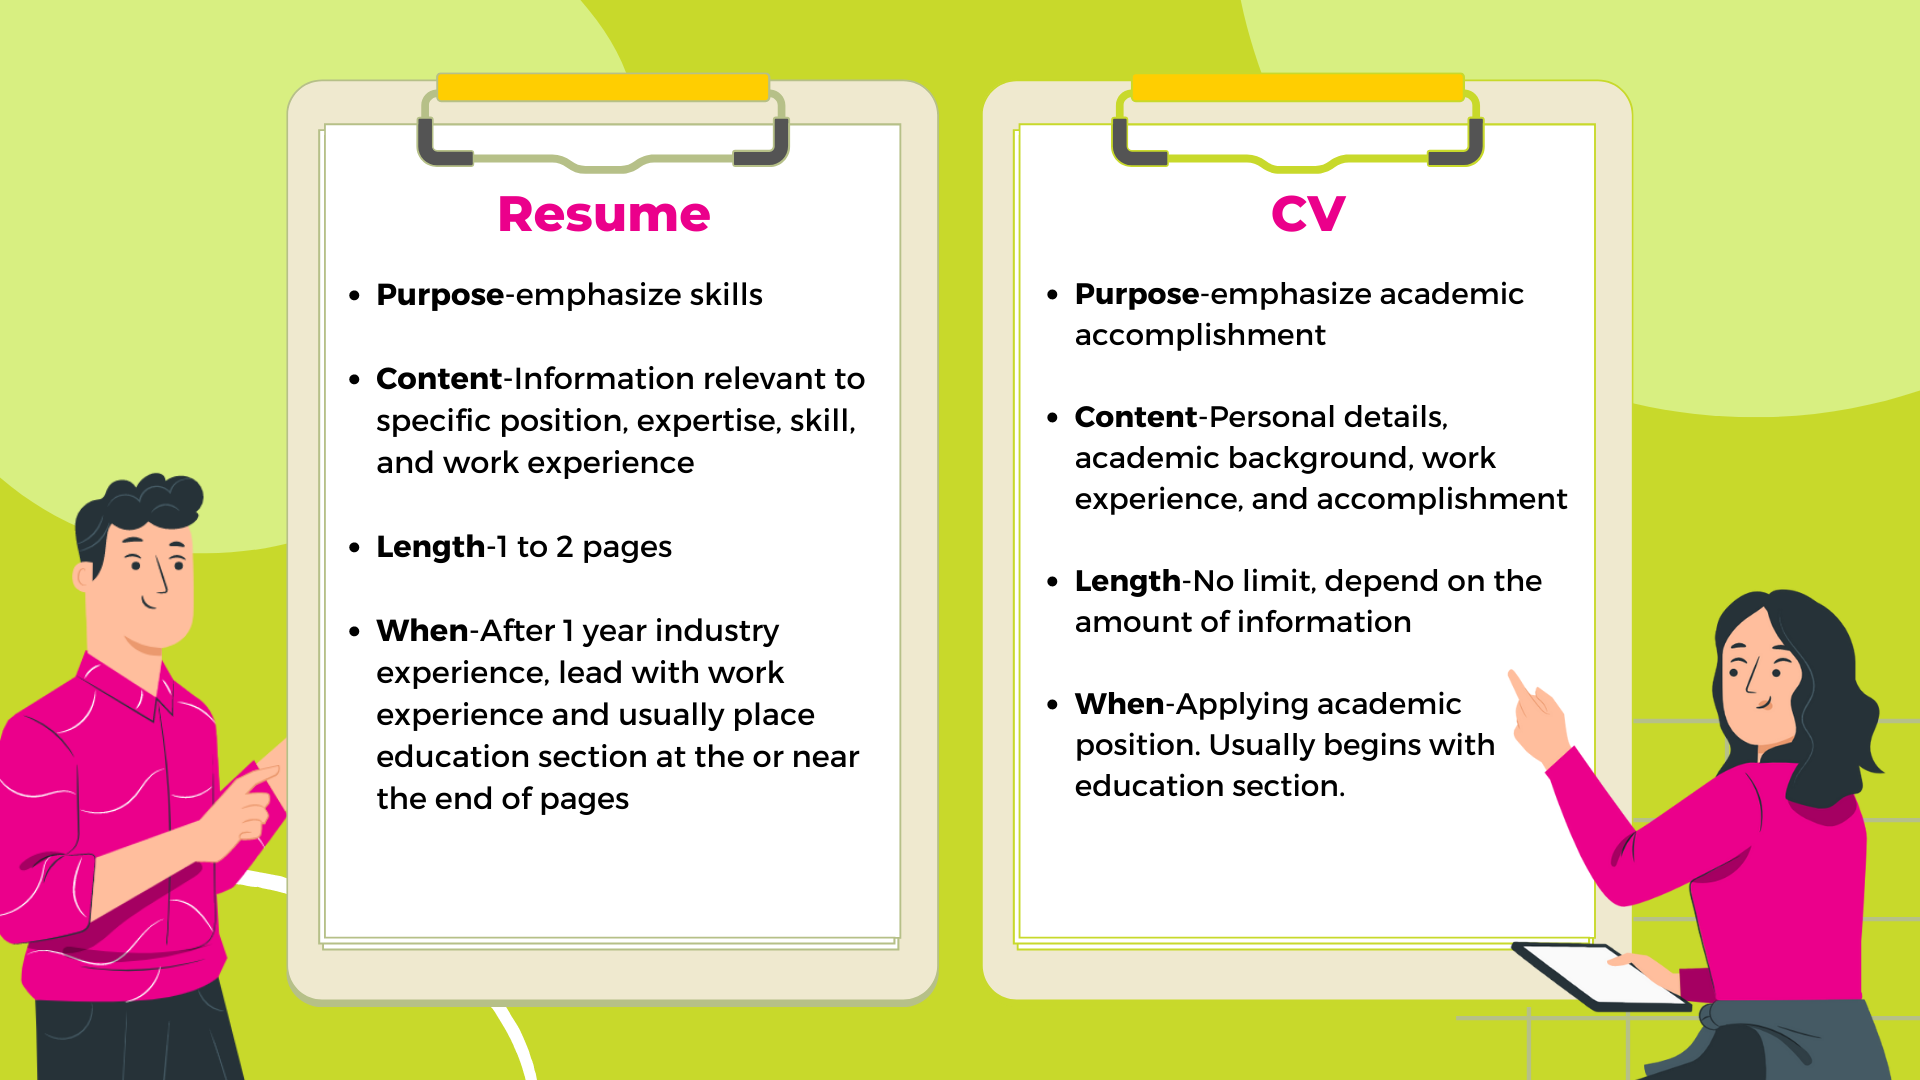 All Things You Should Know About CV